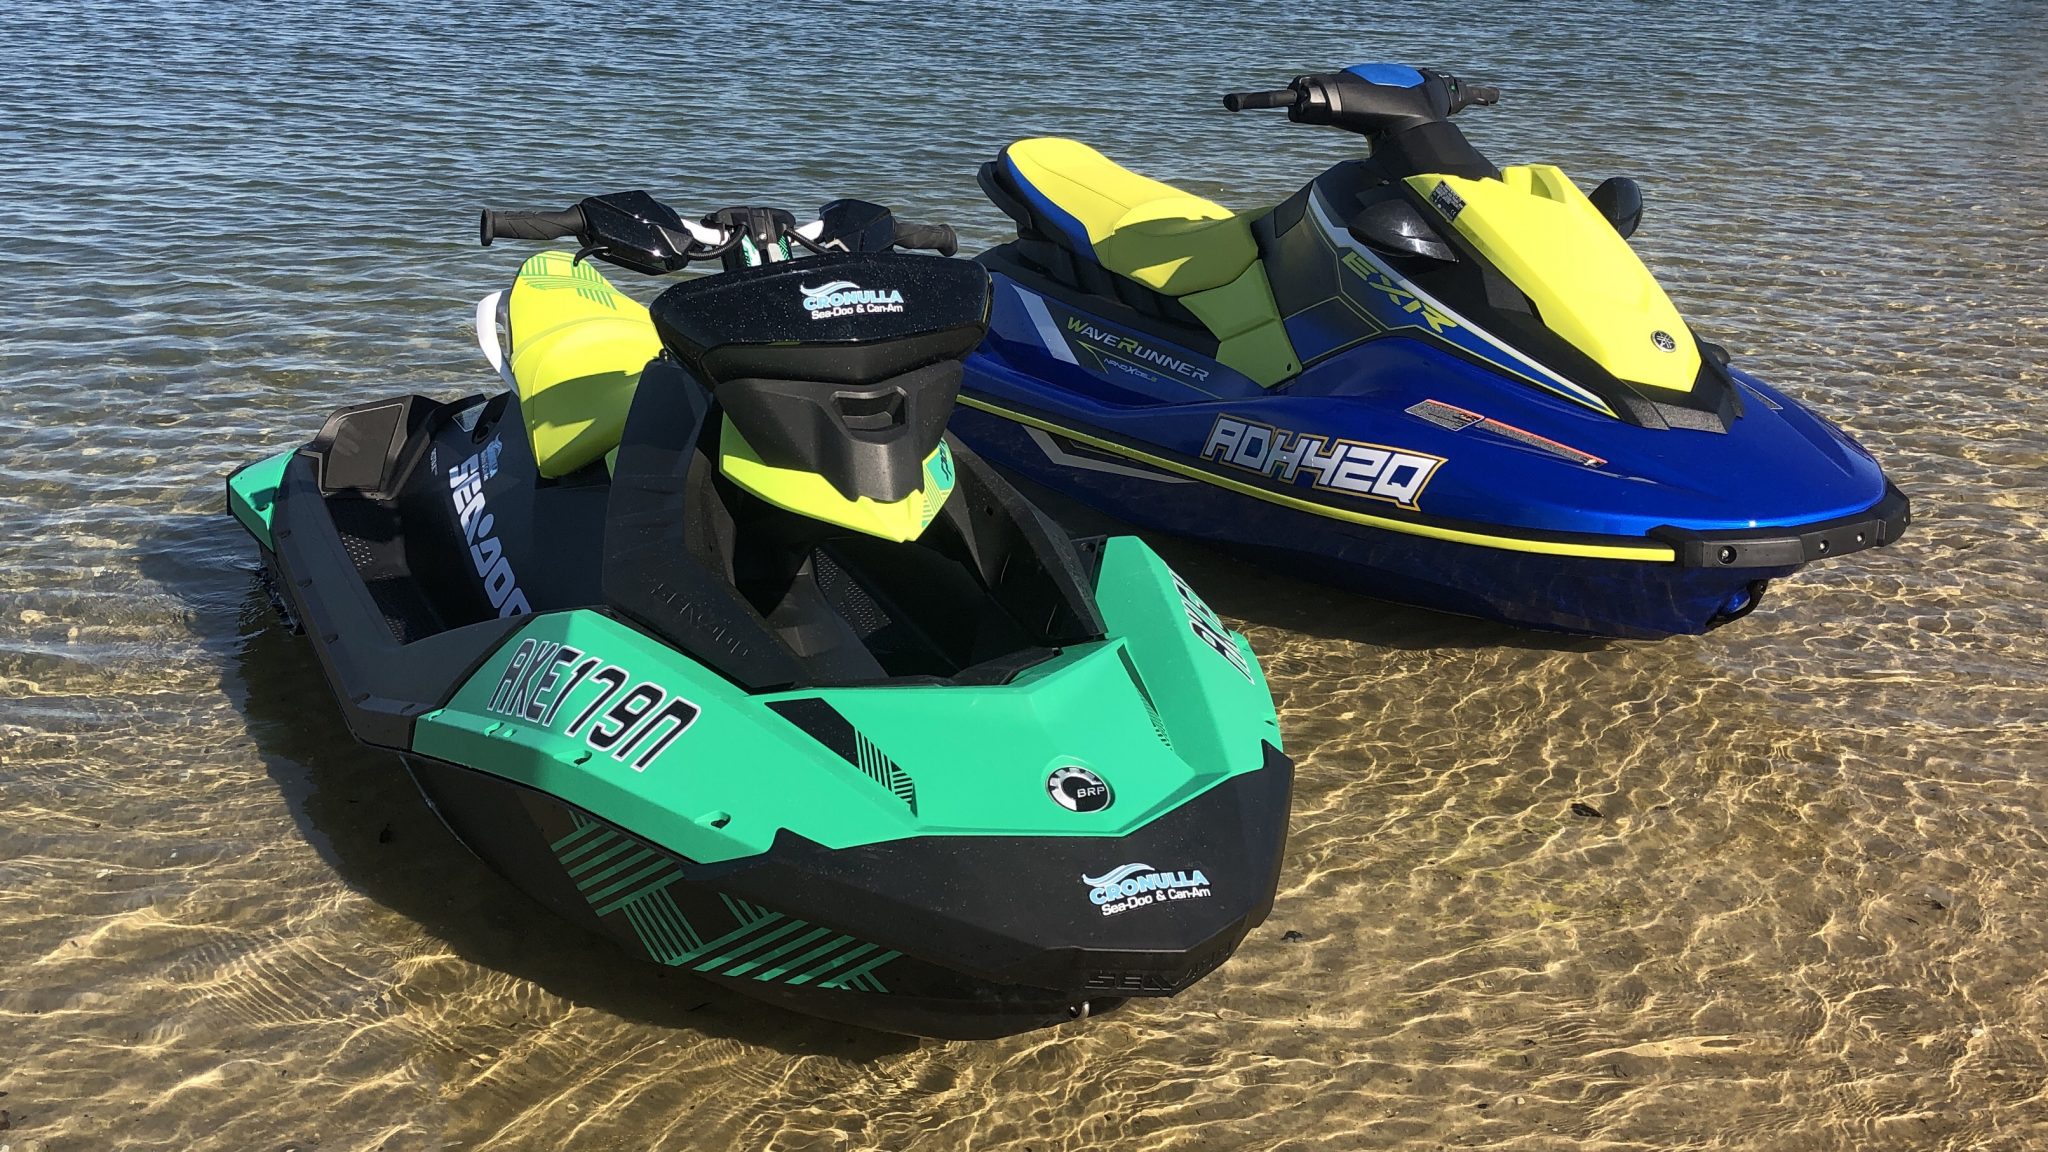 2020 Sea-Doo Spark Trixx vs Yamaha EXR: Review, prices and specs